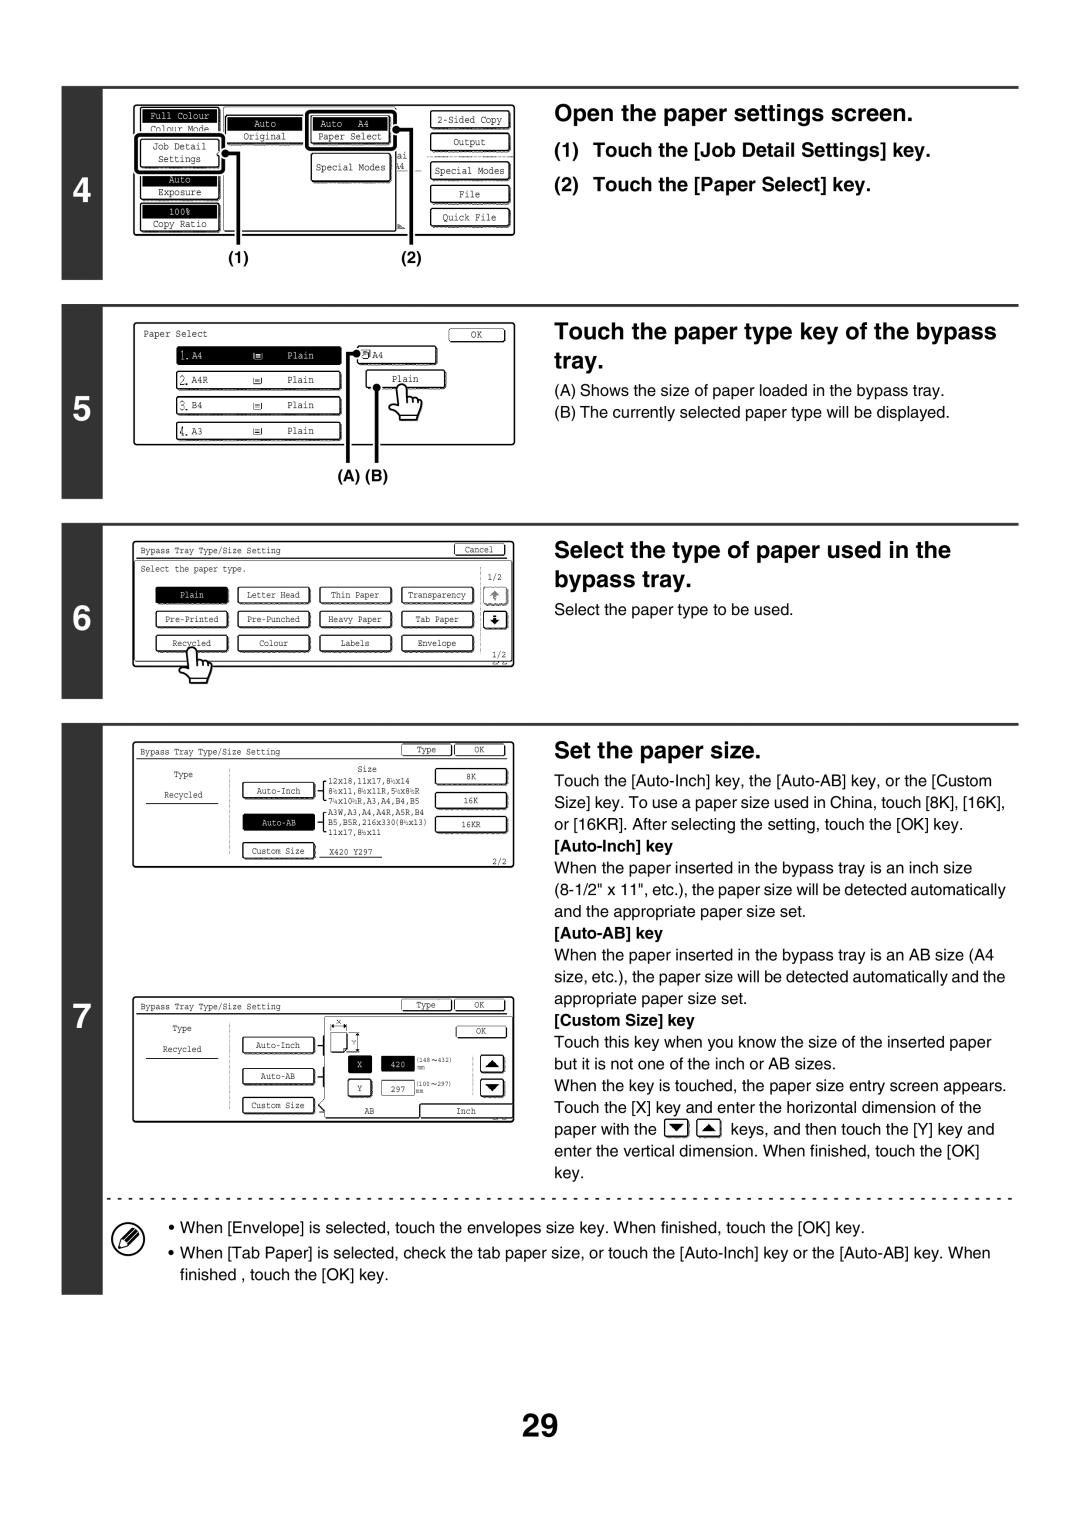 Sharp MX-2300G, MX-2700G Open the paper settings screen, Touch the paper type key of the bypass tray, Set the paper size 